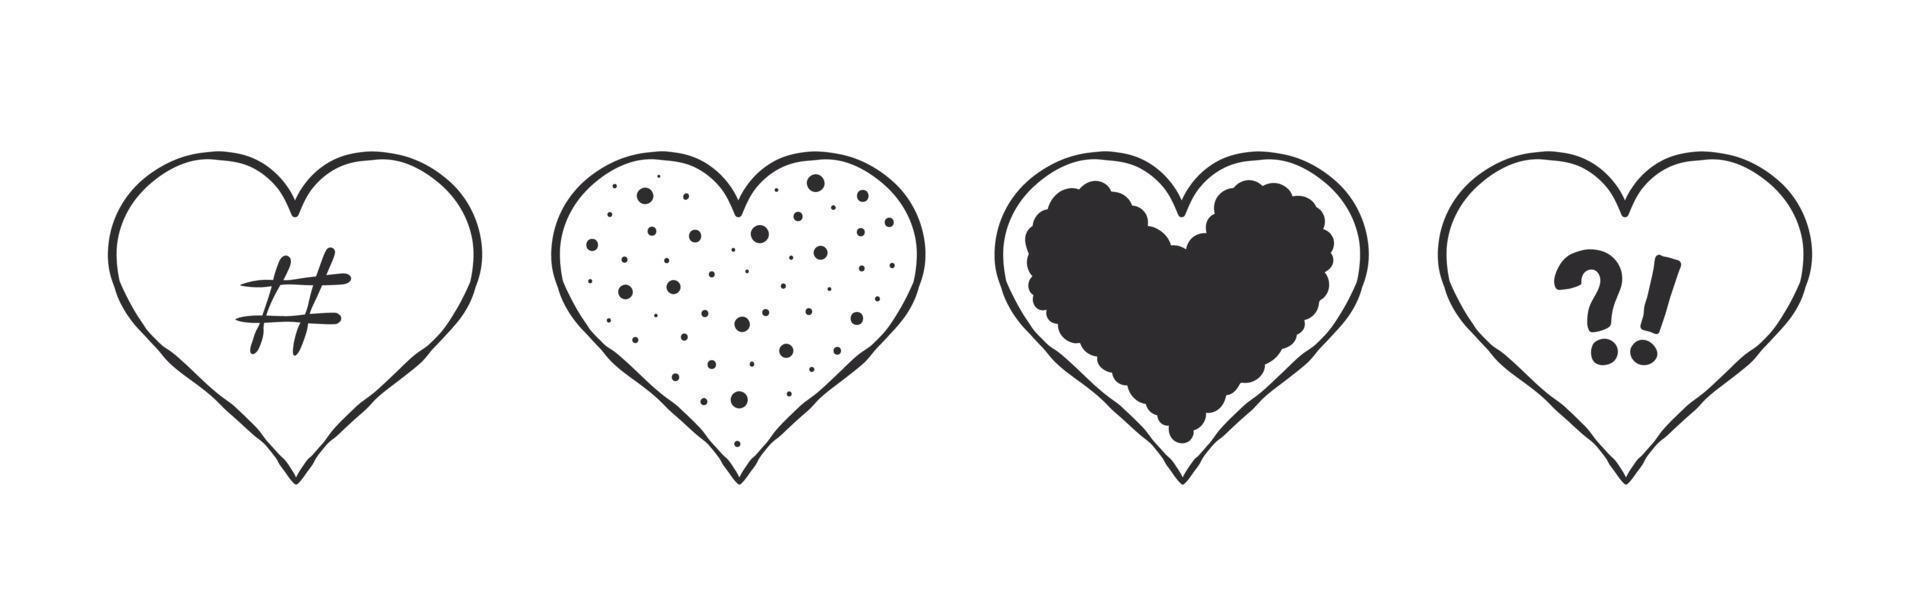 Heart icon collection. Hearts drawn by hand with different textures. Vector images